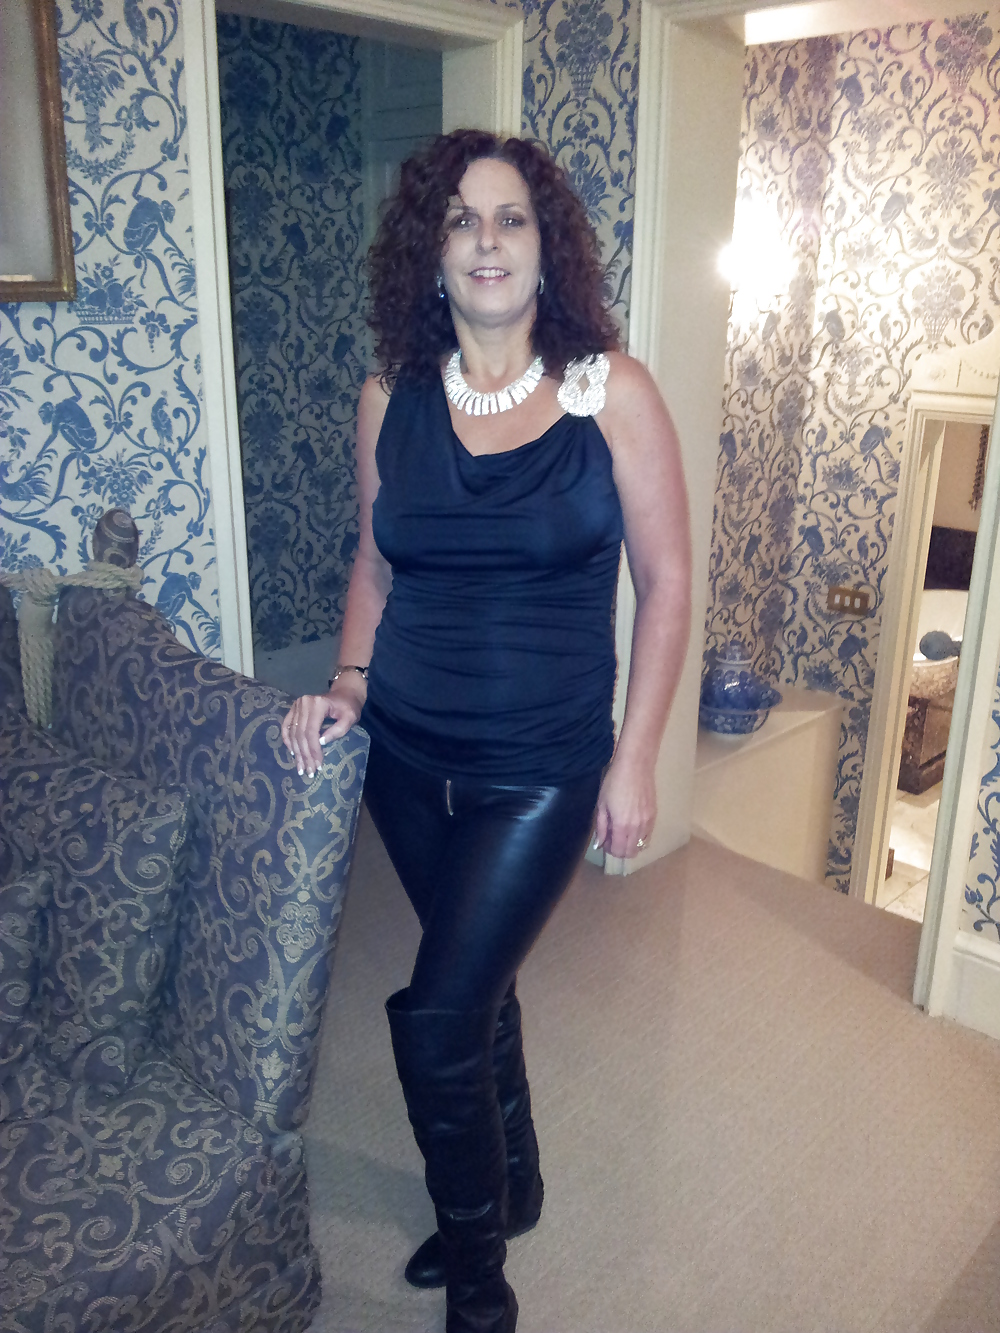 Tania getting ready to go out #16559896